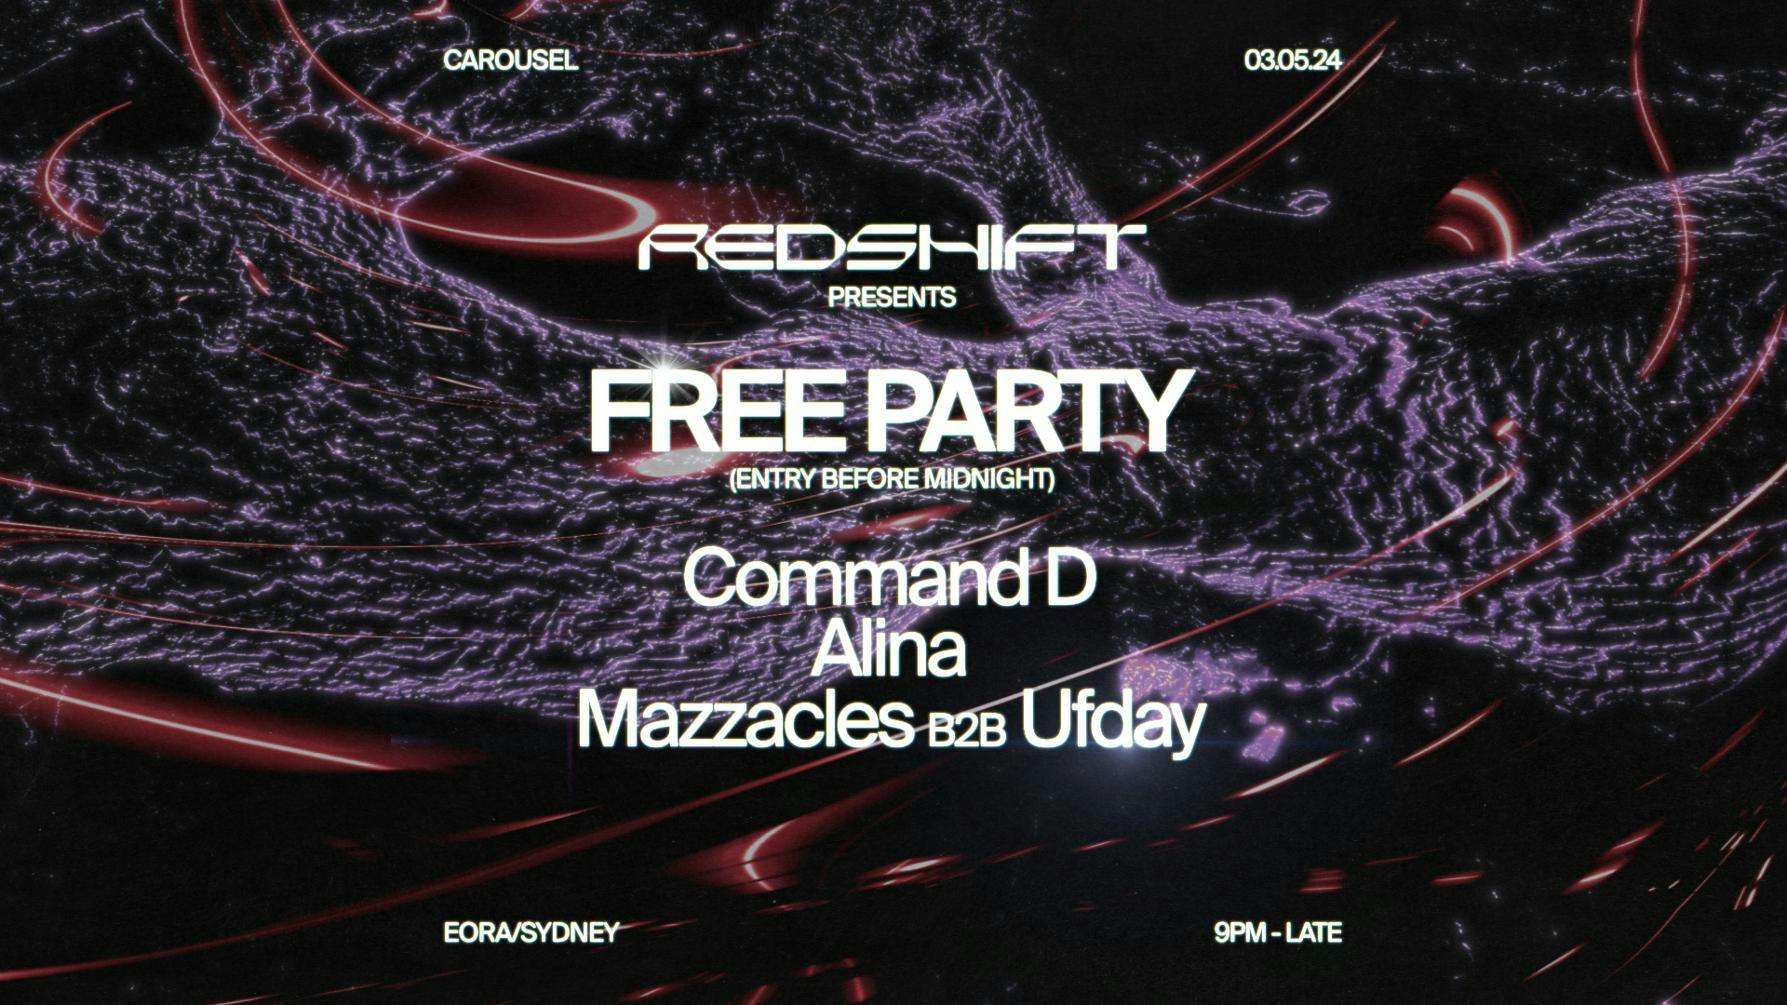 Redshift & Carousel Present: FREE PARTY with Command D, Alina, Mazzacles B2B Ufday